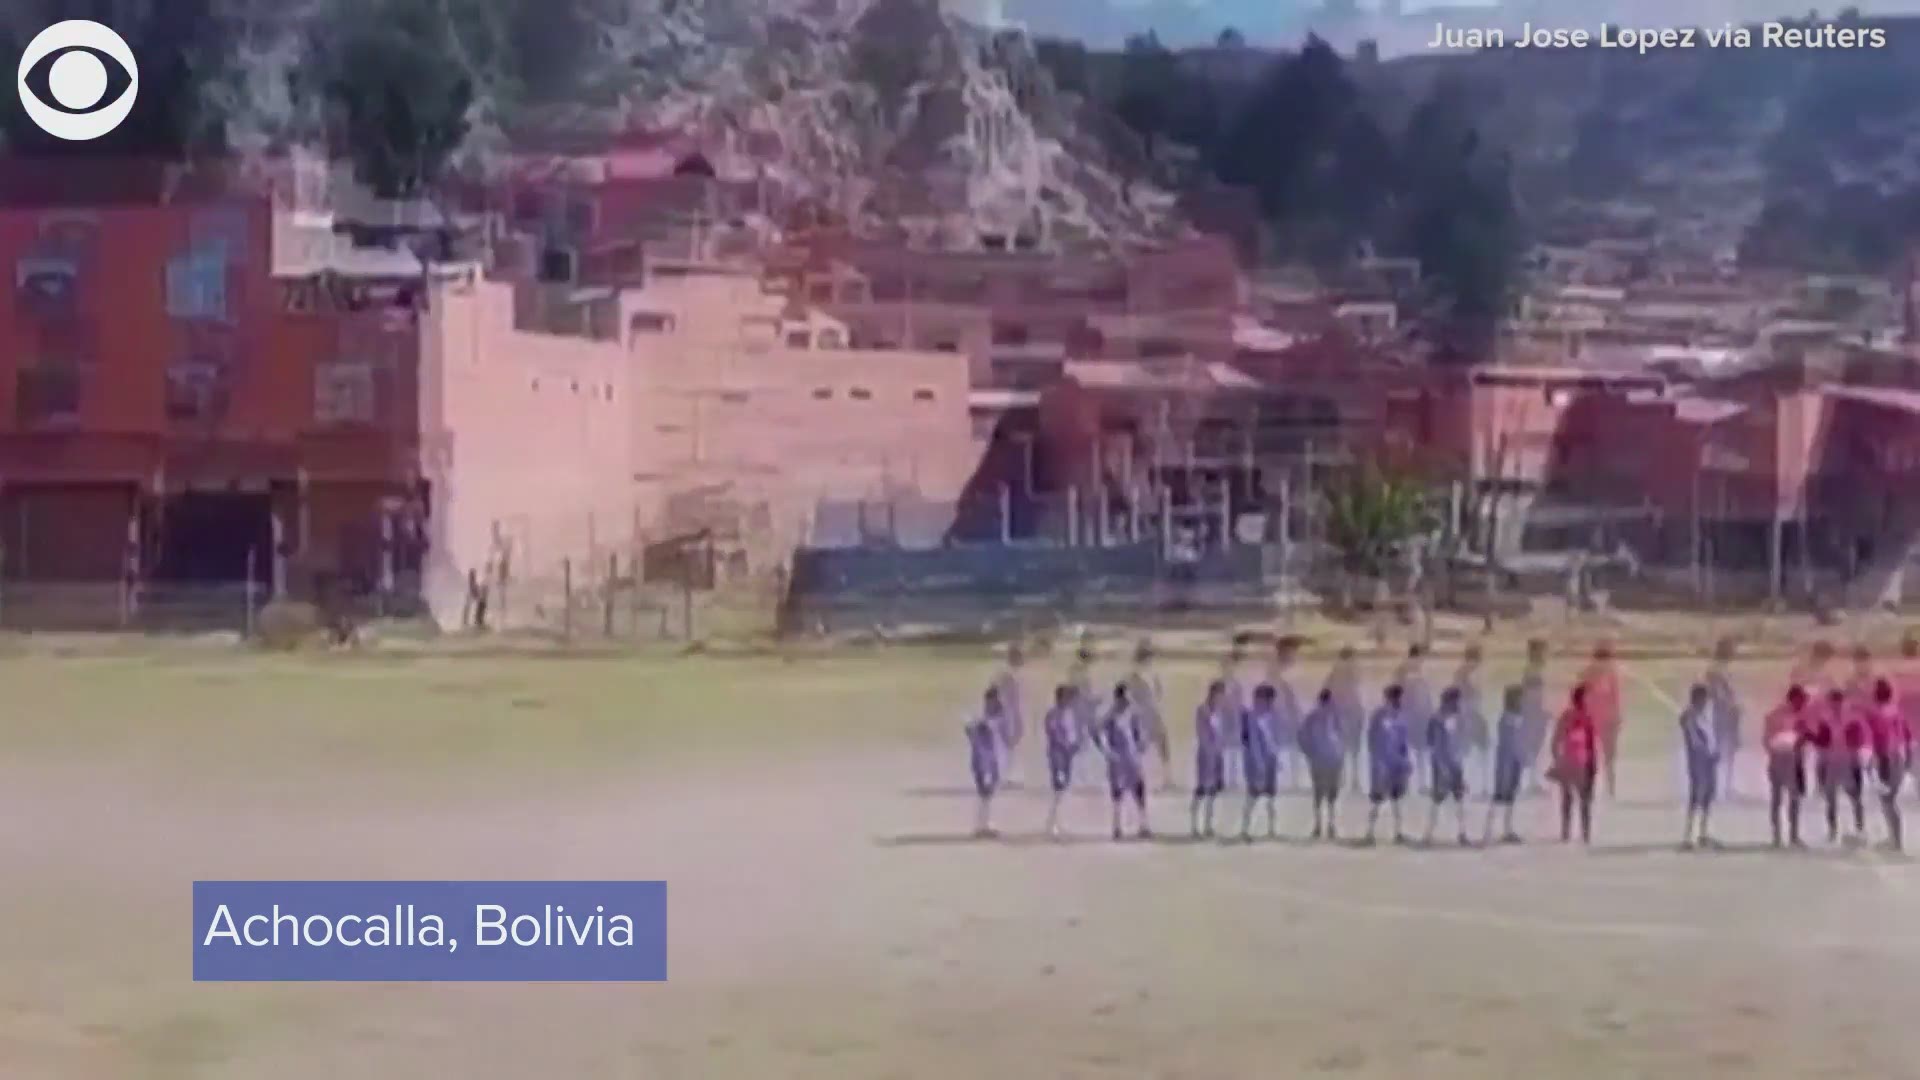 Players ran out of the way as a dust devil rolled across a soccer field and interrupted a game. According to Reuters, this happened in Bolivia on Tuesday (7/20).